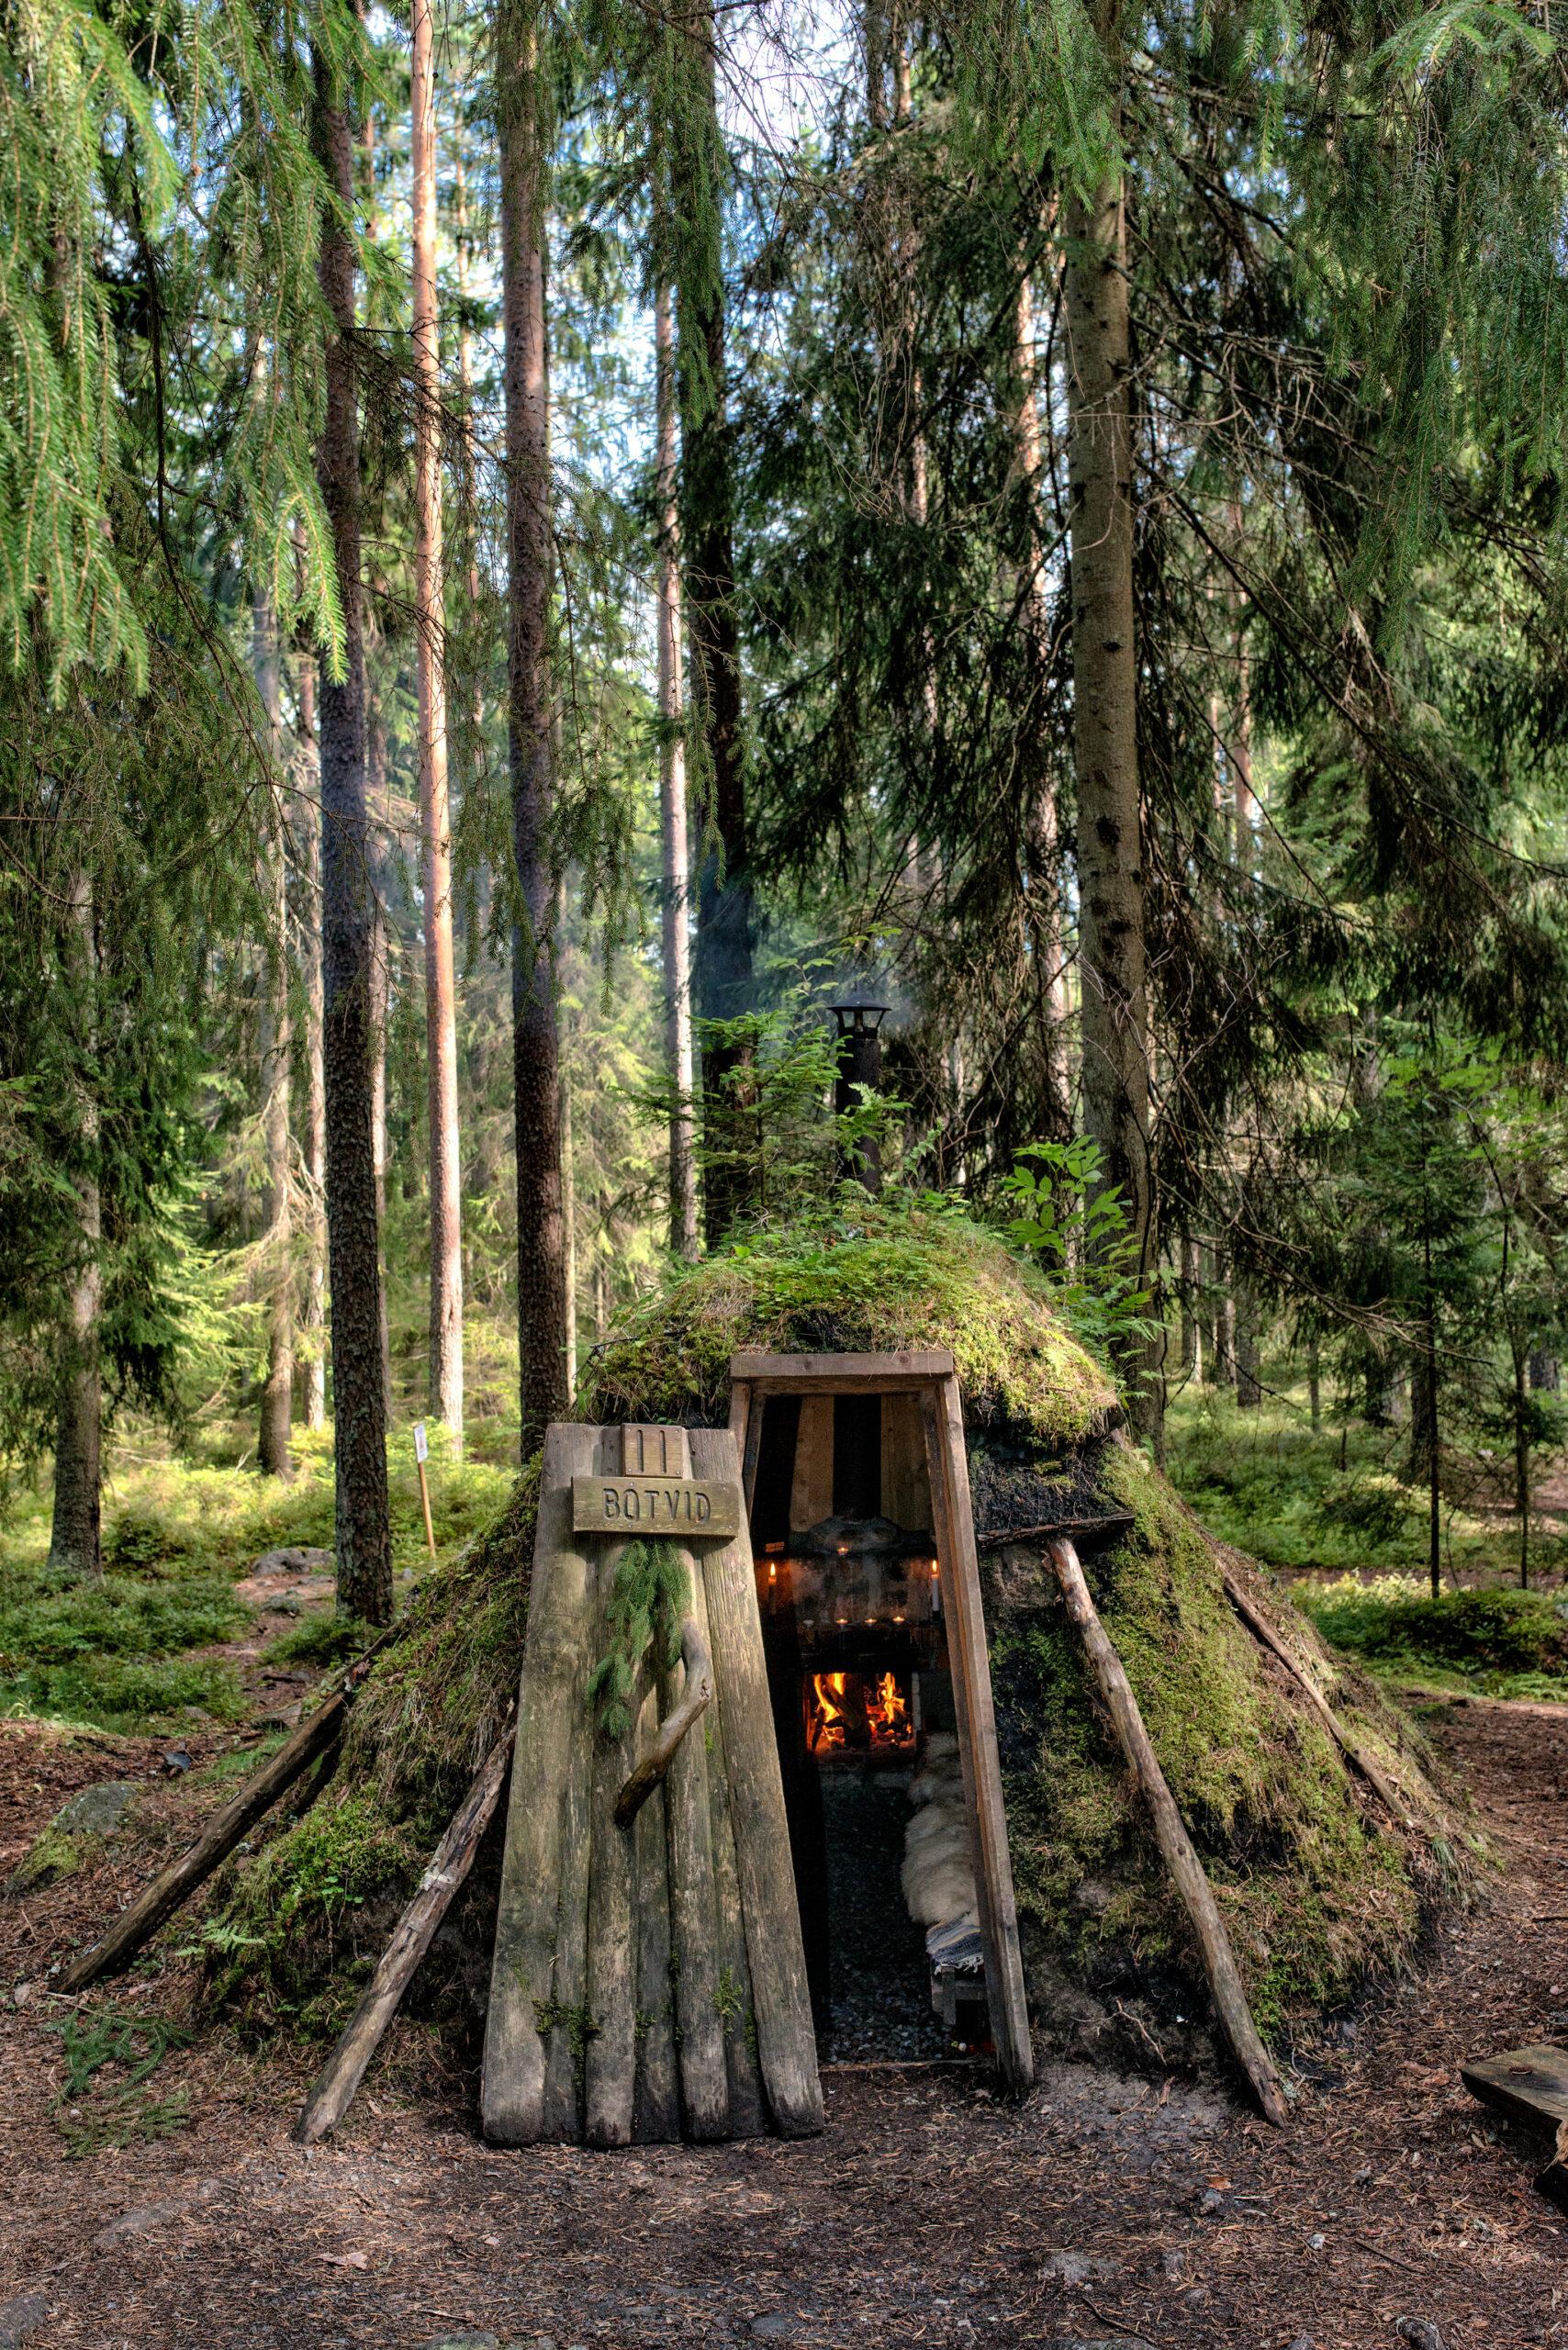 A primitive-looking hut in a forest.